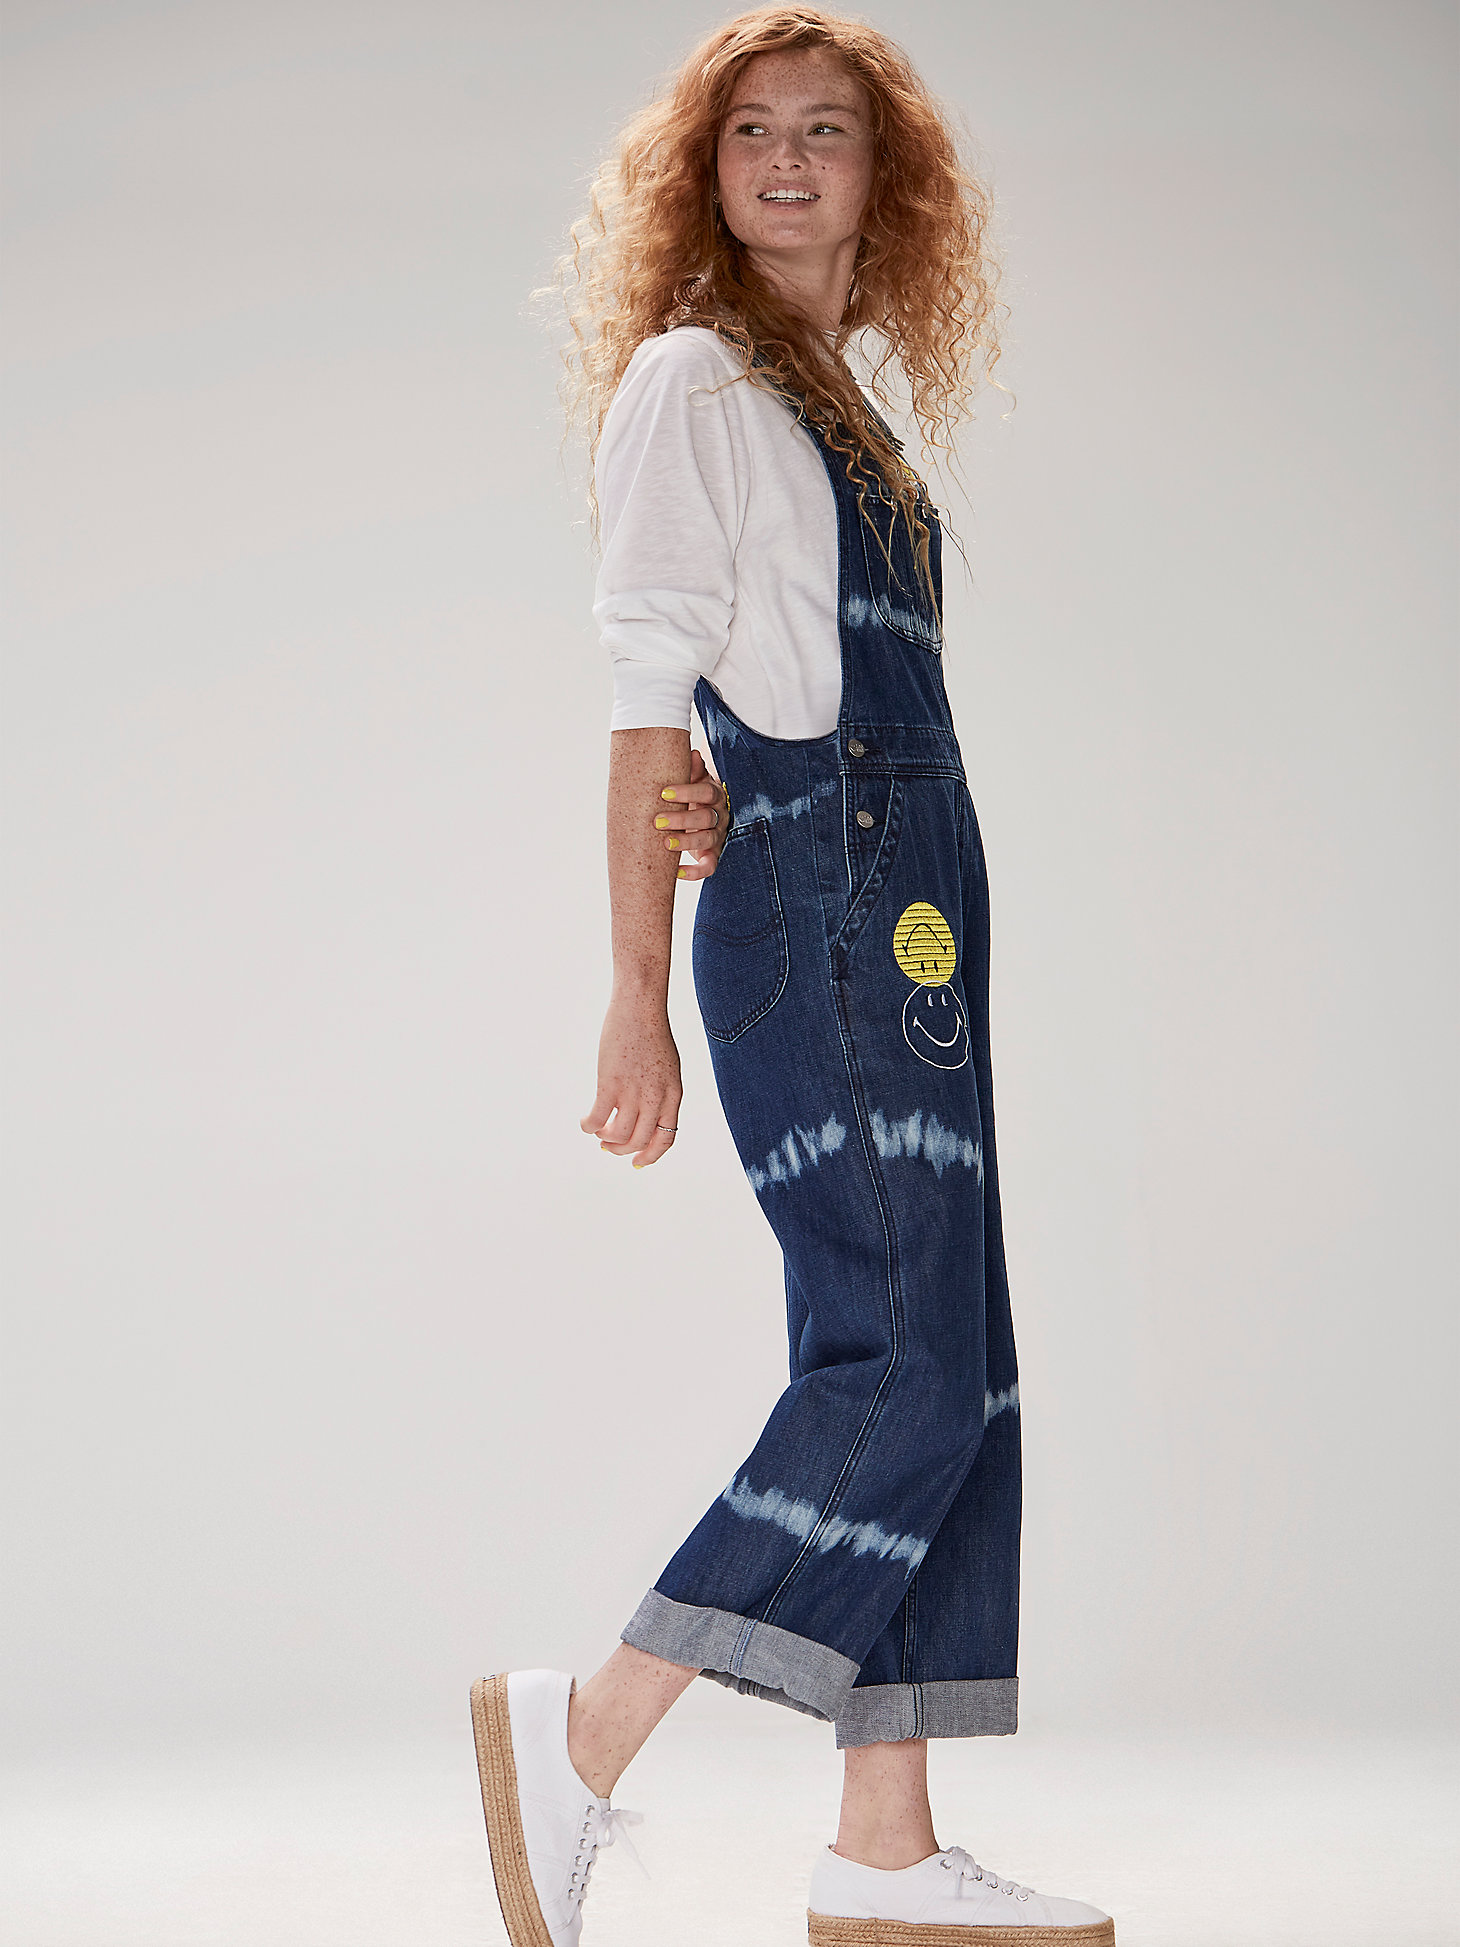 Women's Lee® X Smiley® Bleached Striped Dungaree Overall in Mid Dark Shade alternative view 1